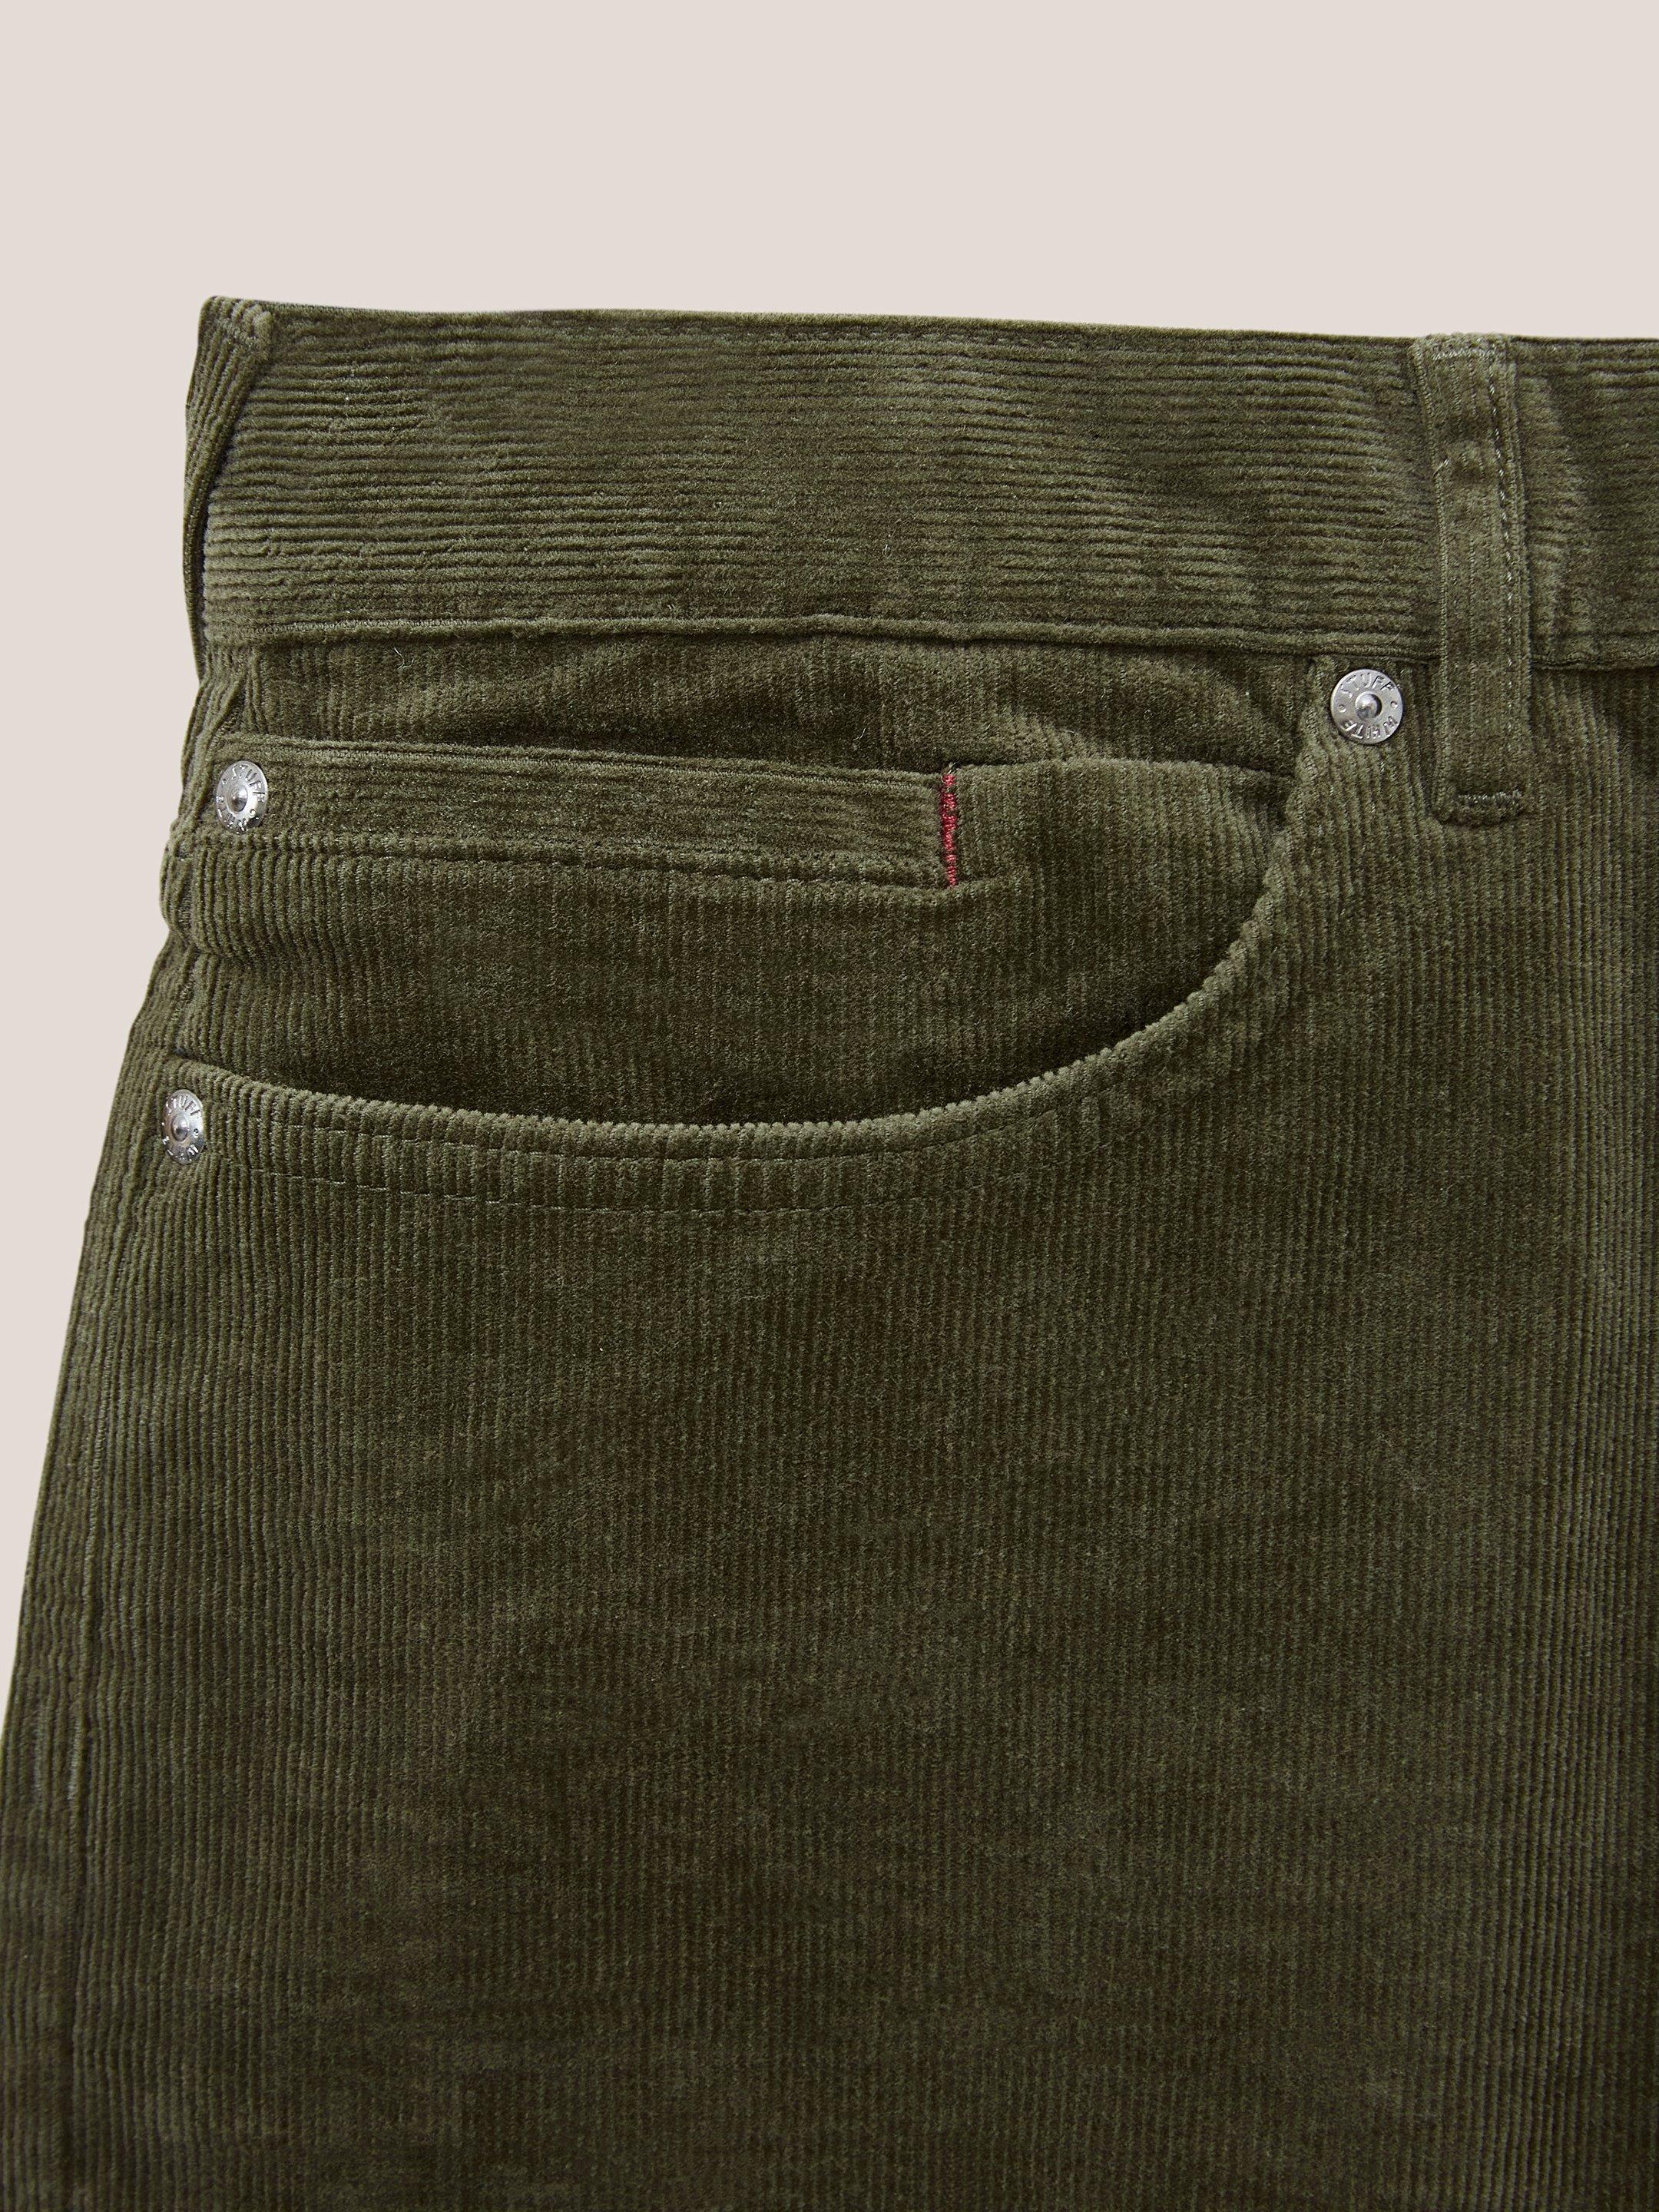 Crosby Cord Trouser in LGT GREEN - FLAT DETAIL